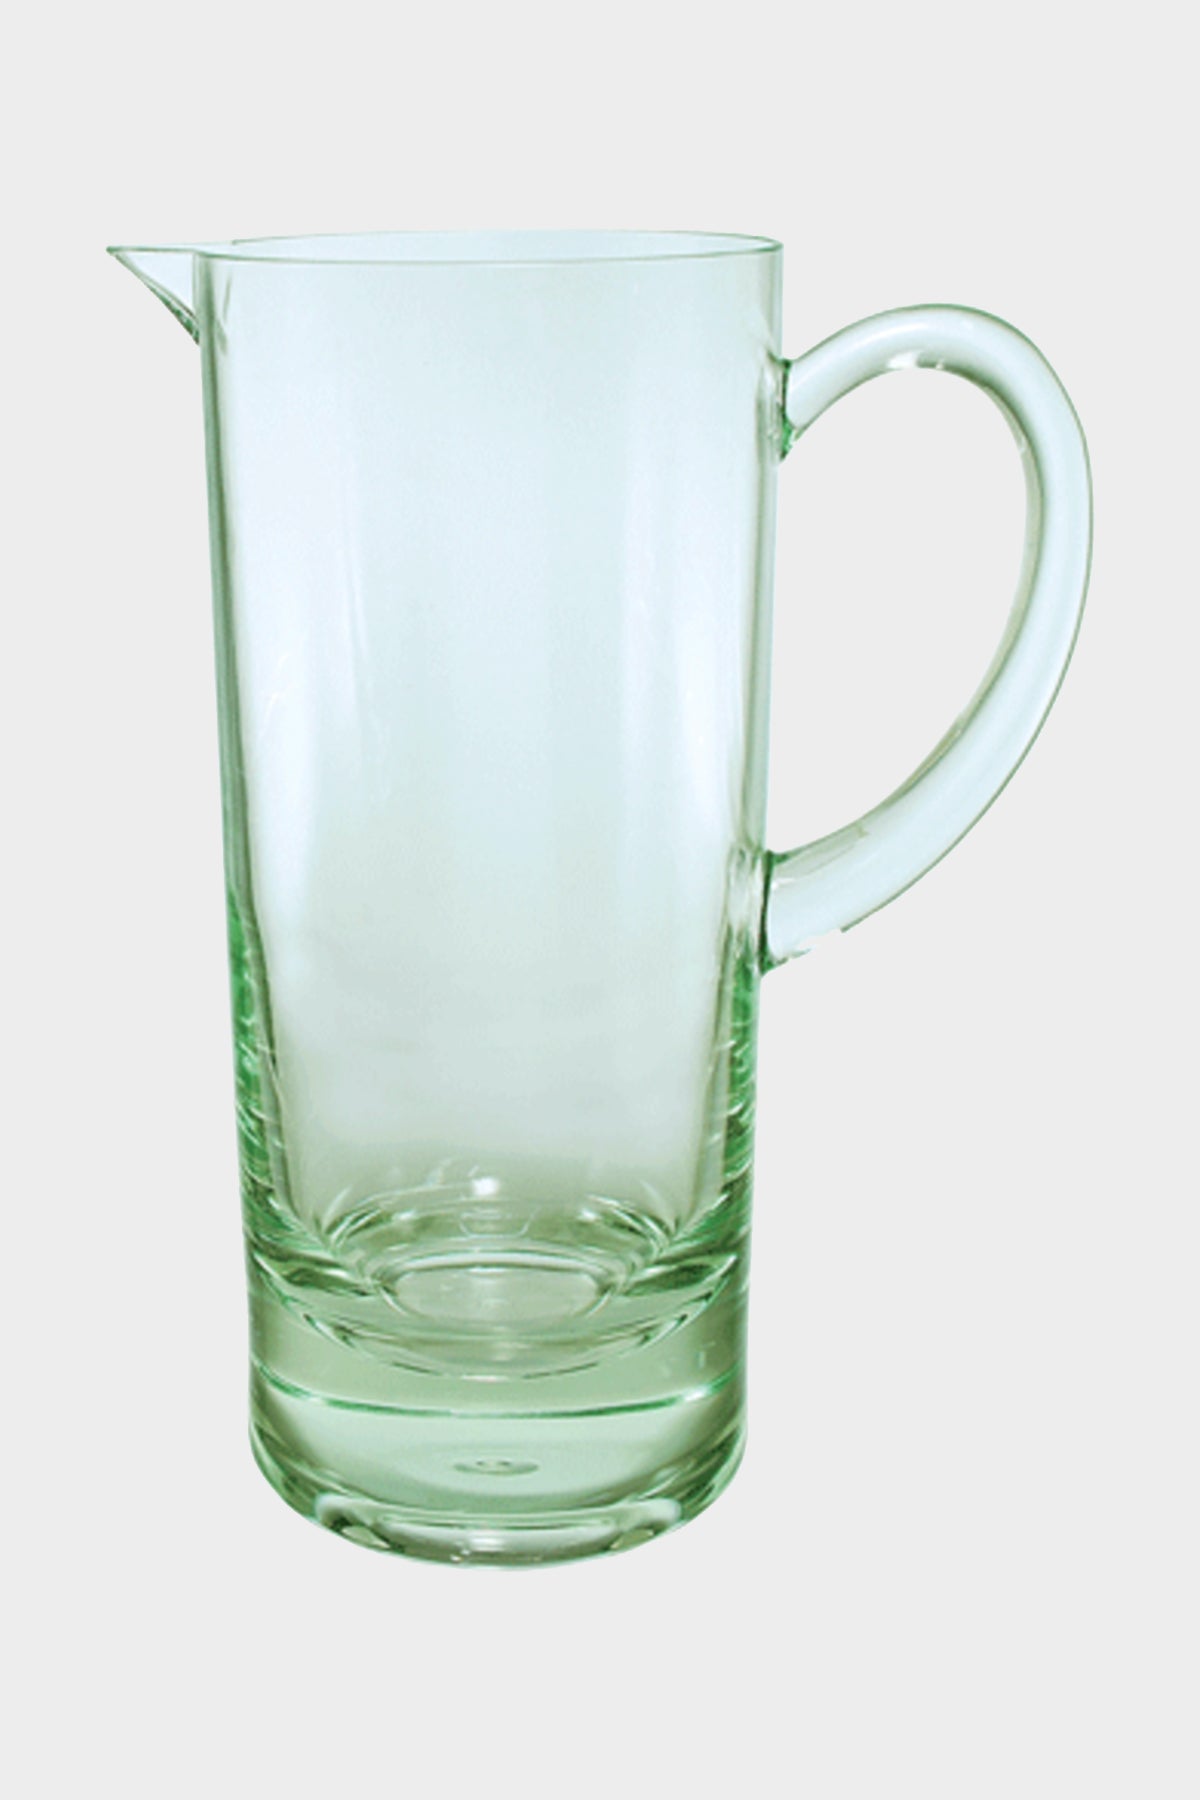 Acrylic Tall Pitcher in Light Green - shop-olivia.com